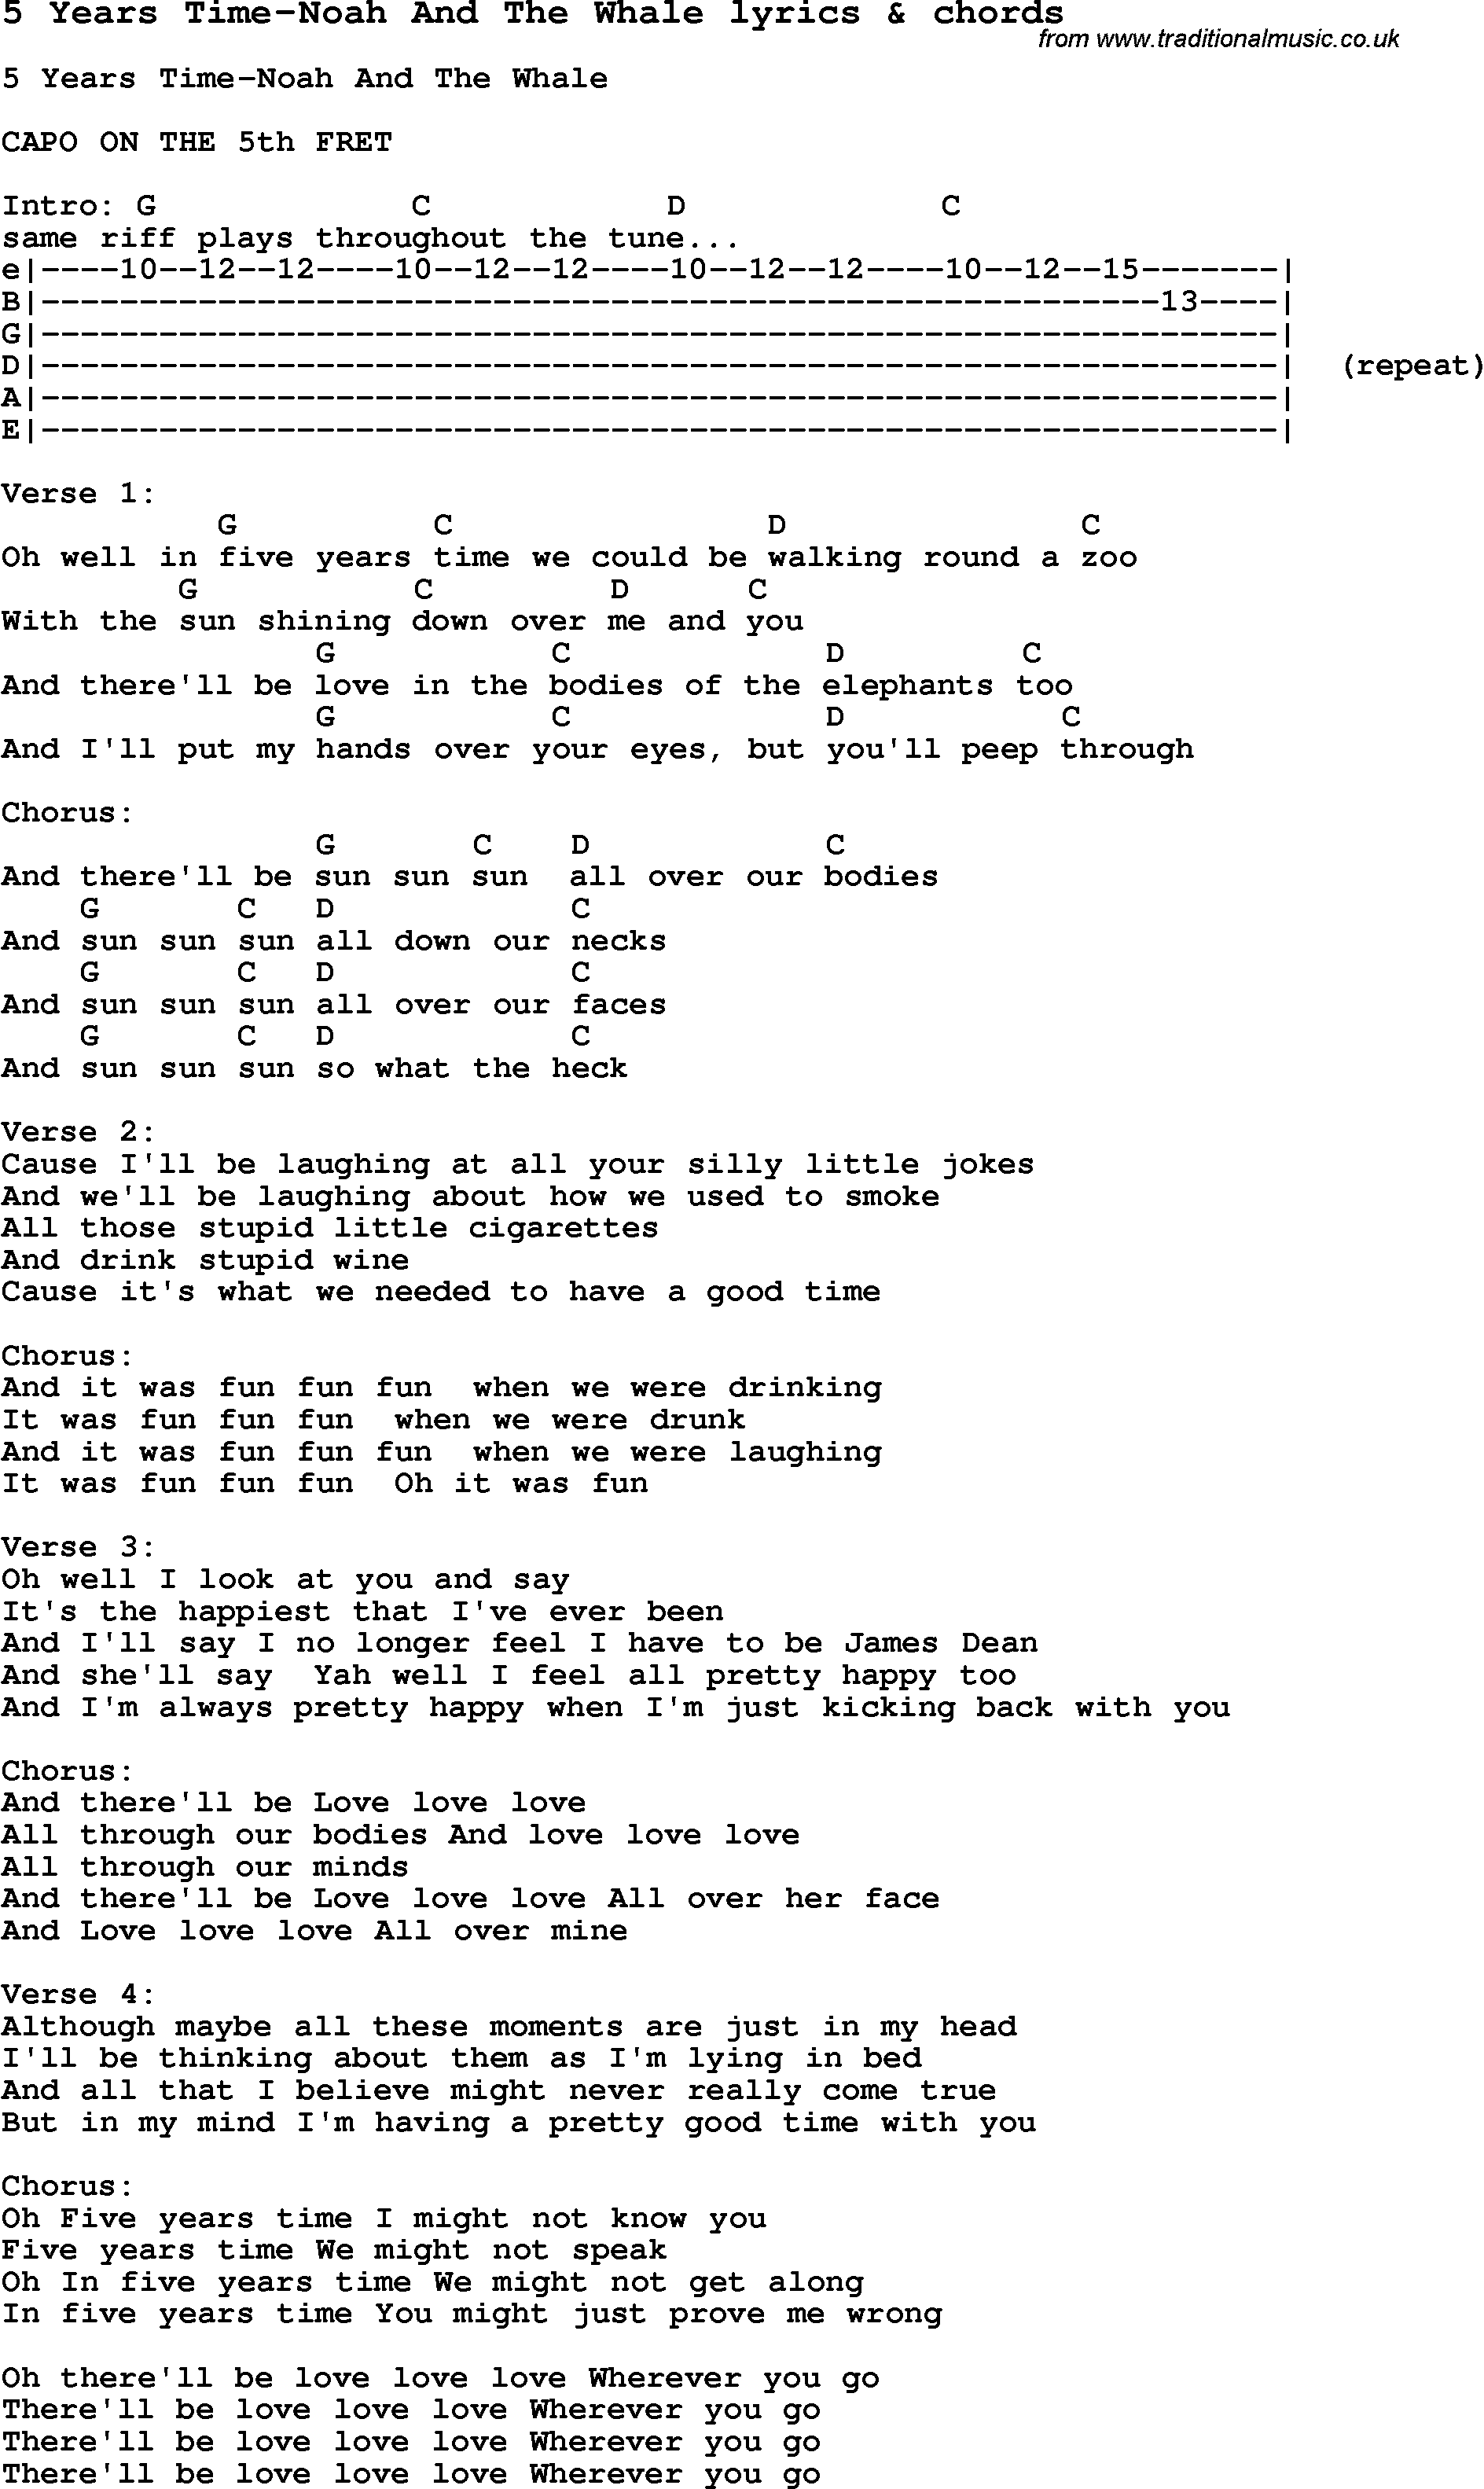 Love Song Lyrics for: 5 Years Time-Noah And The Whale with chords for Ukulele, Guitar Banjo etc.